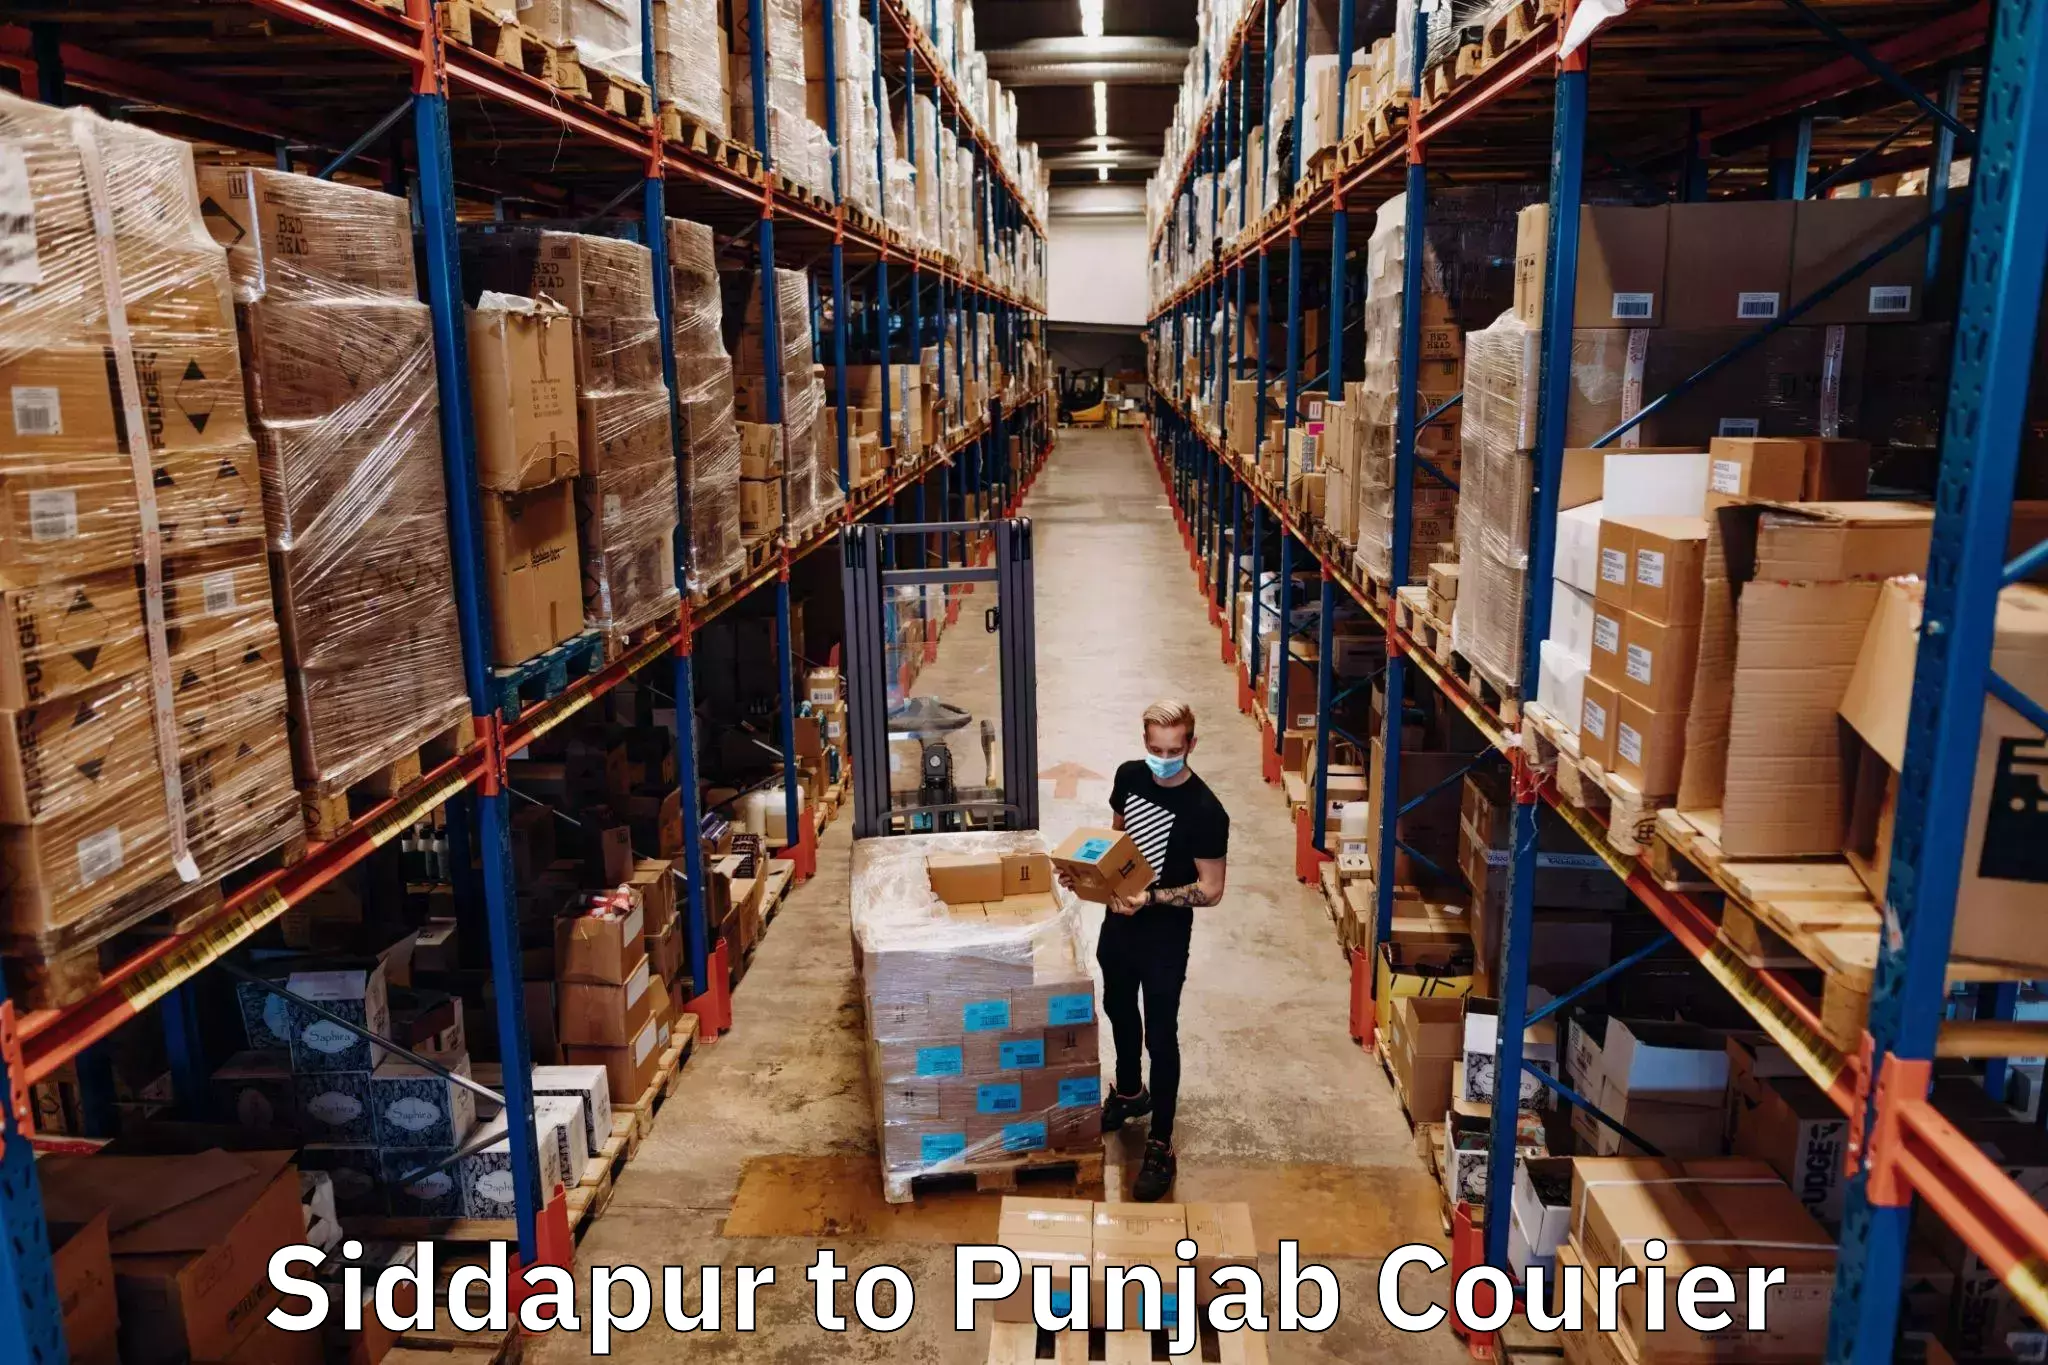 Doorstep delivery service Siddapur to Punjab